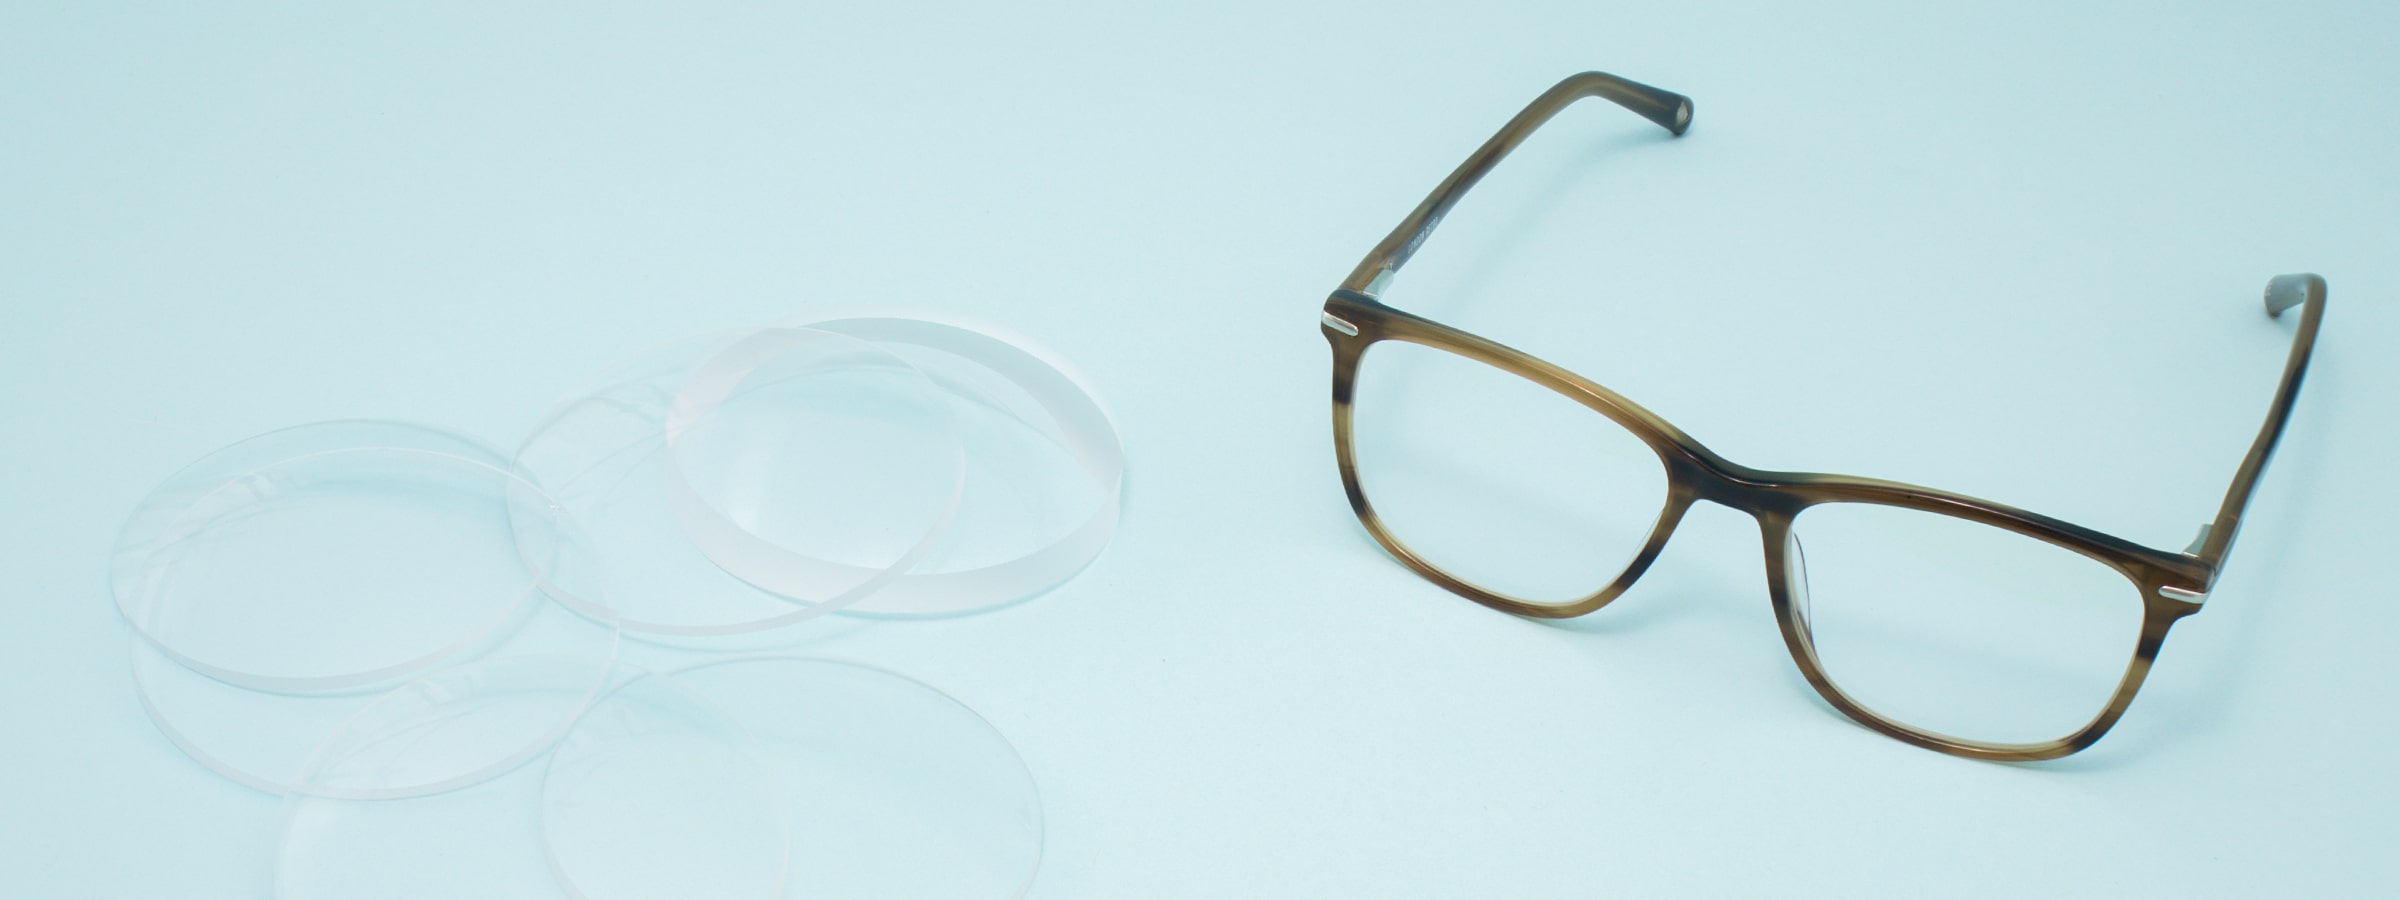 A pair of glasses and several lenses lying on a table